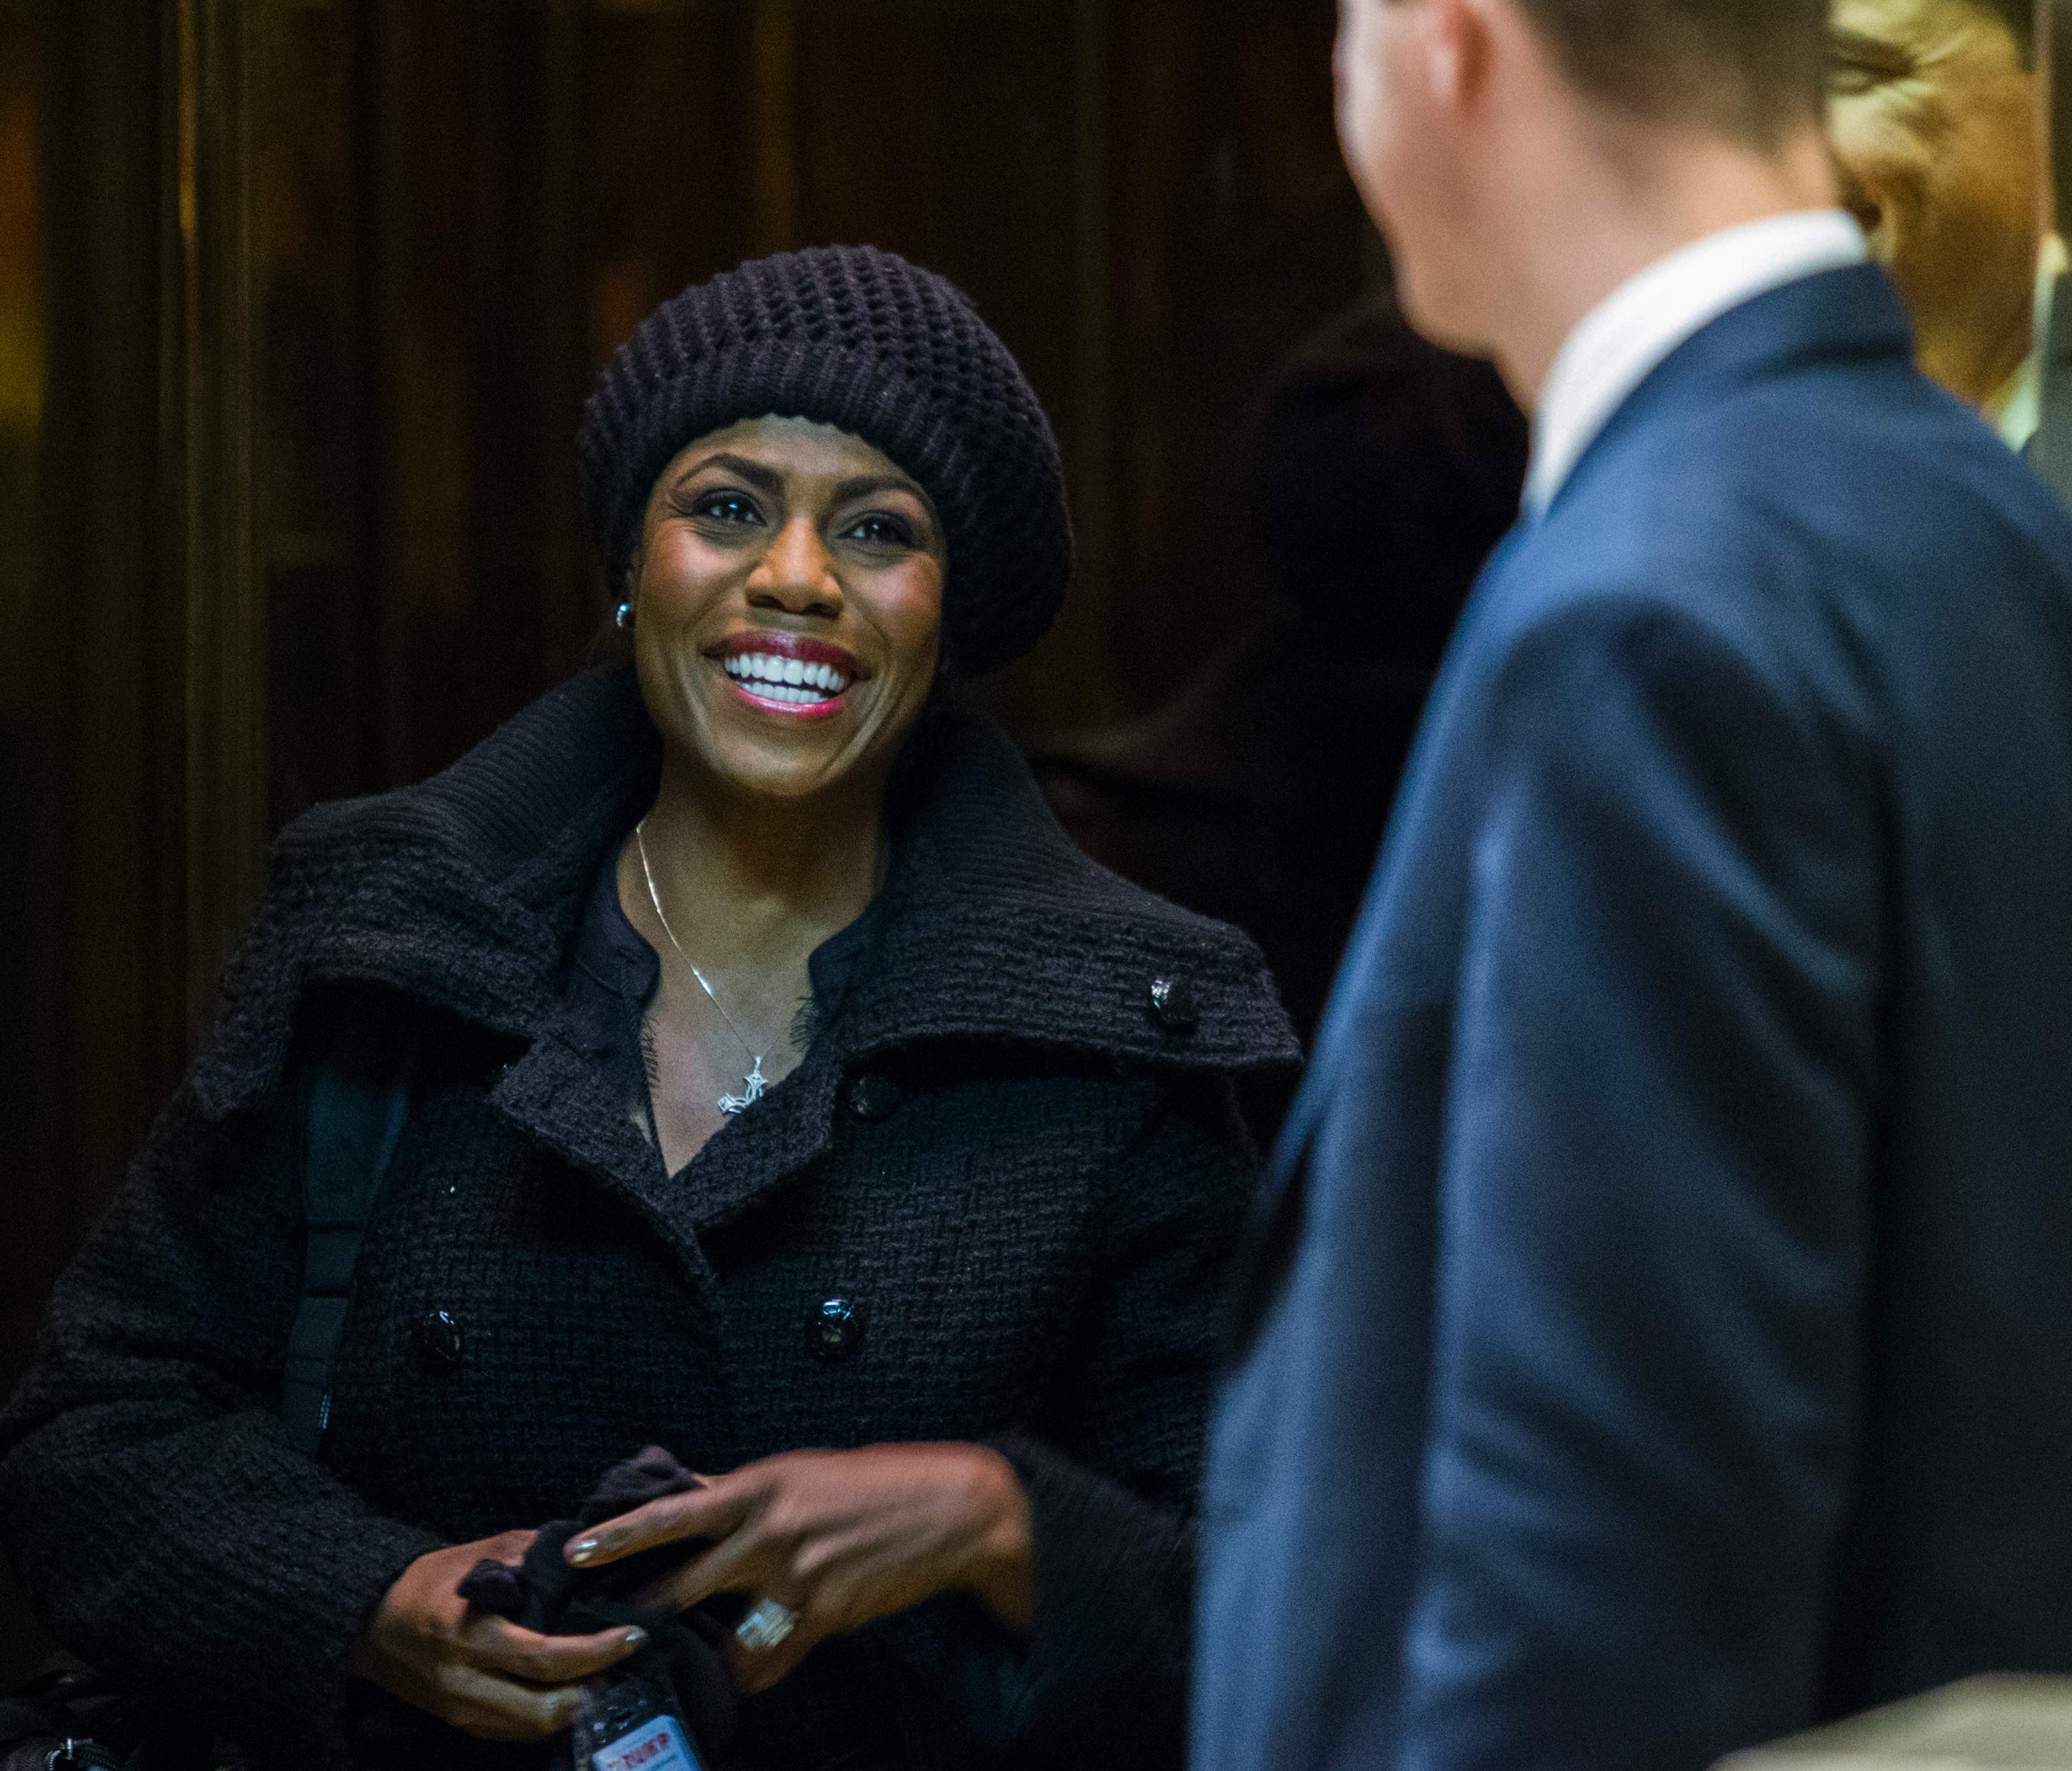 Omarosa Manigault arrives at Trump Tower for meetings with President-elect Donald Trump on Jan. 2, 2017 in New York.